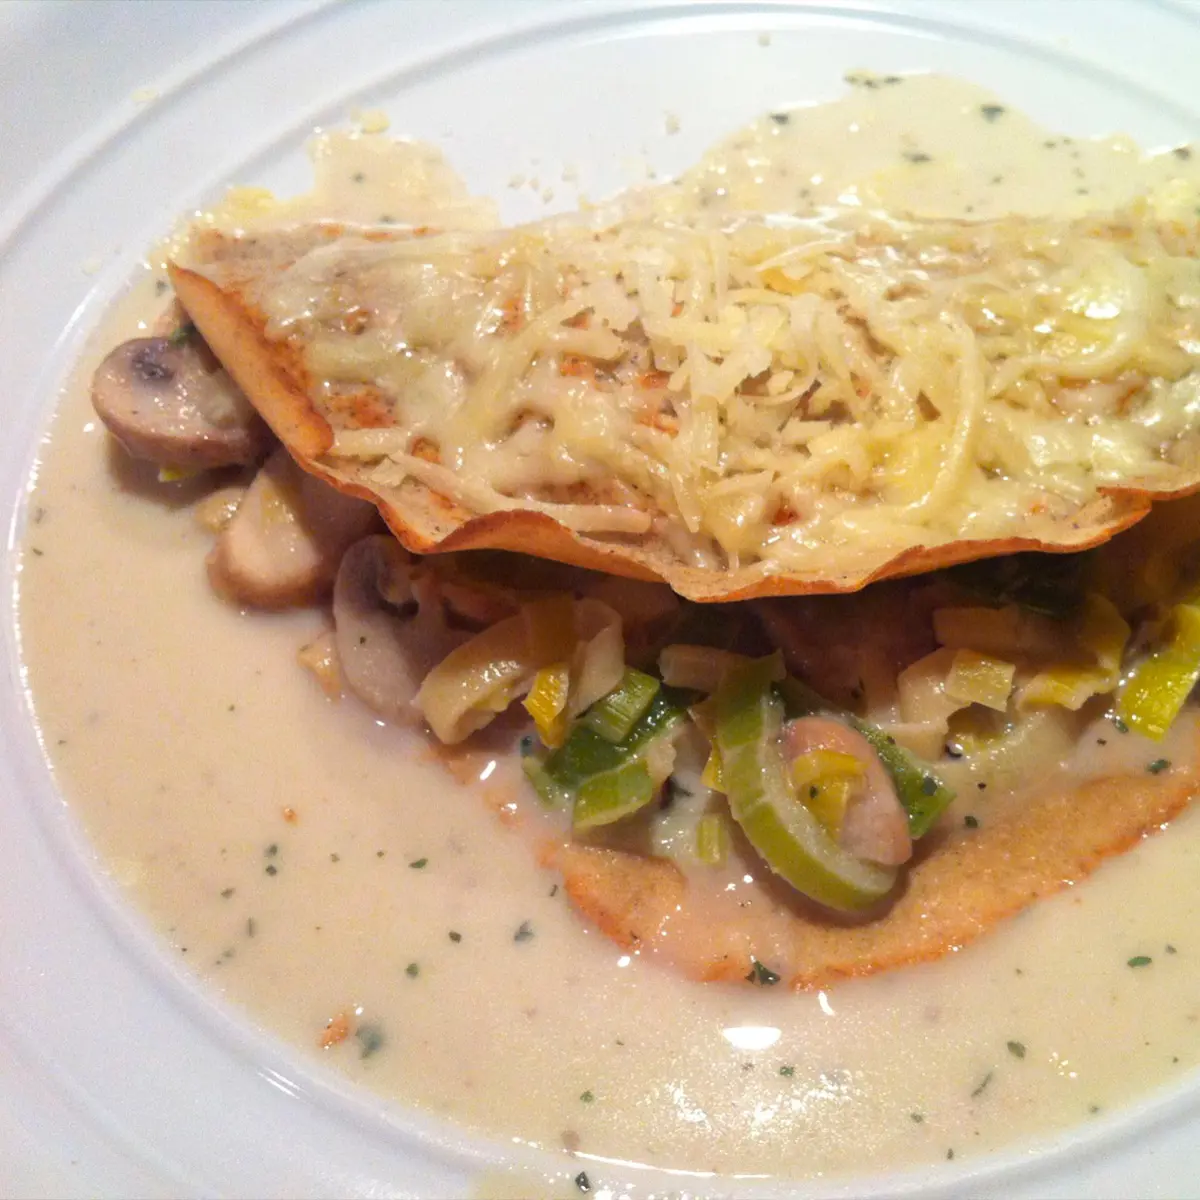 Stuffed crepes with leeks and mushrooms, gluten free